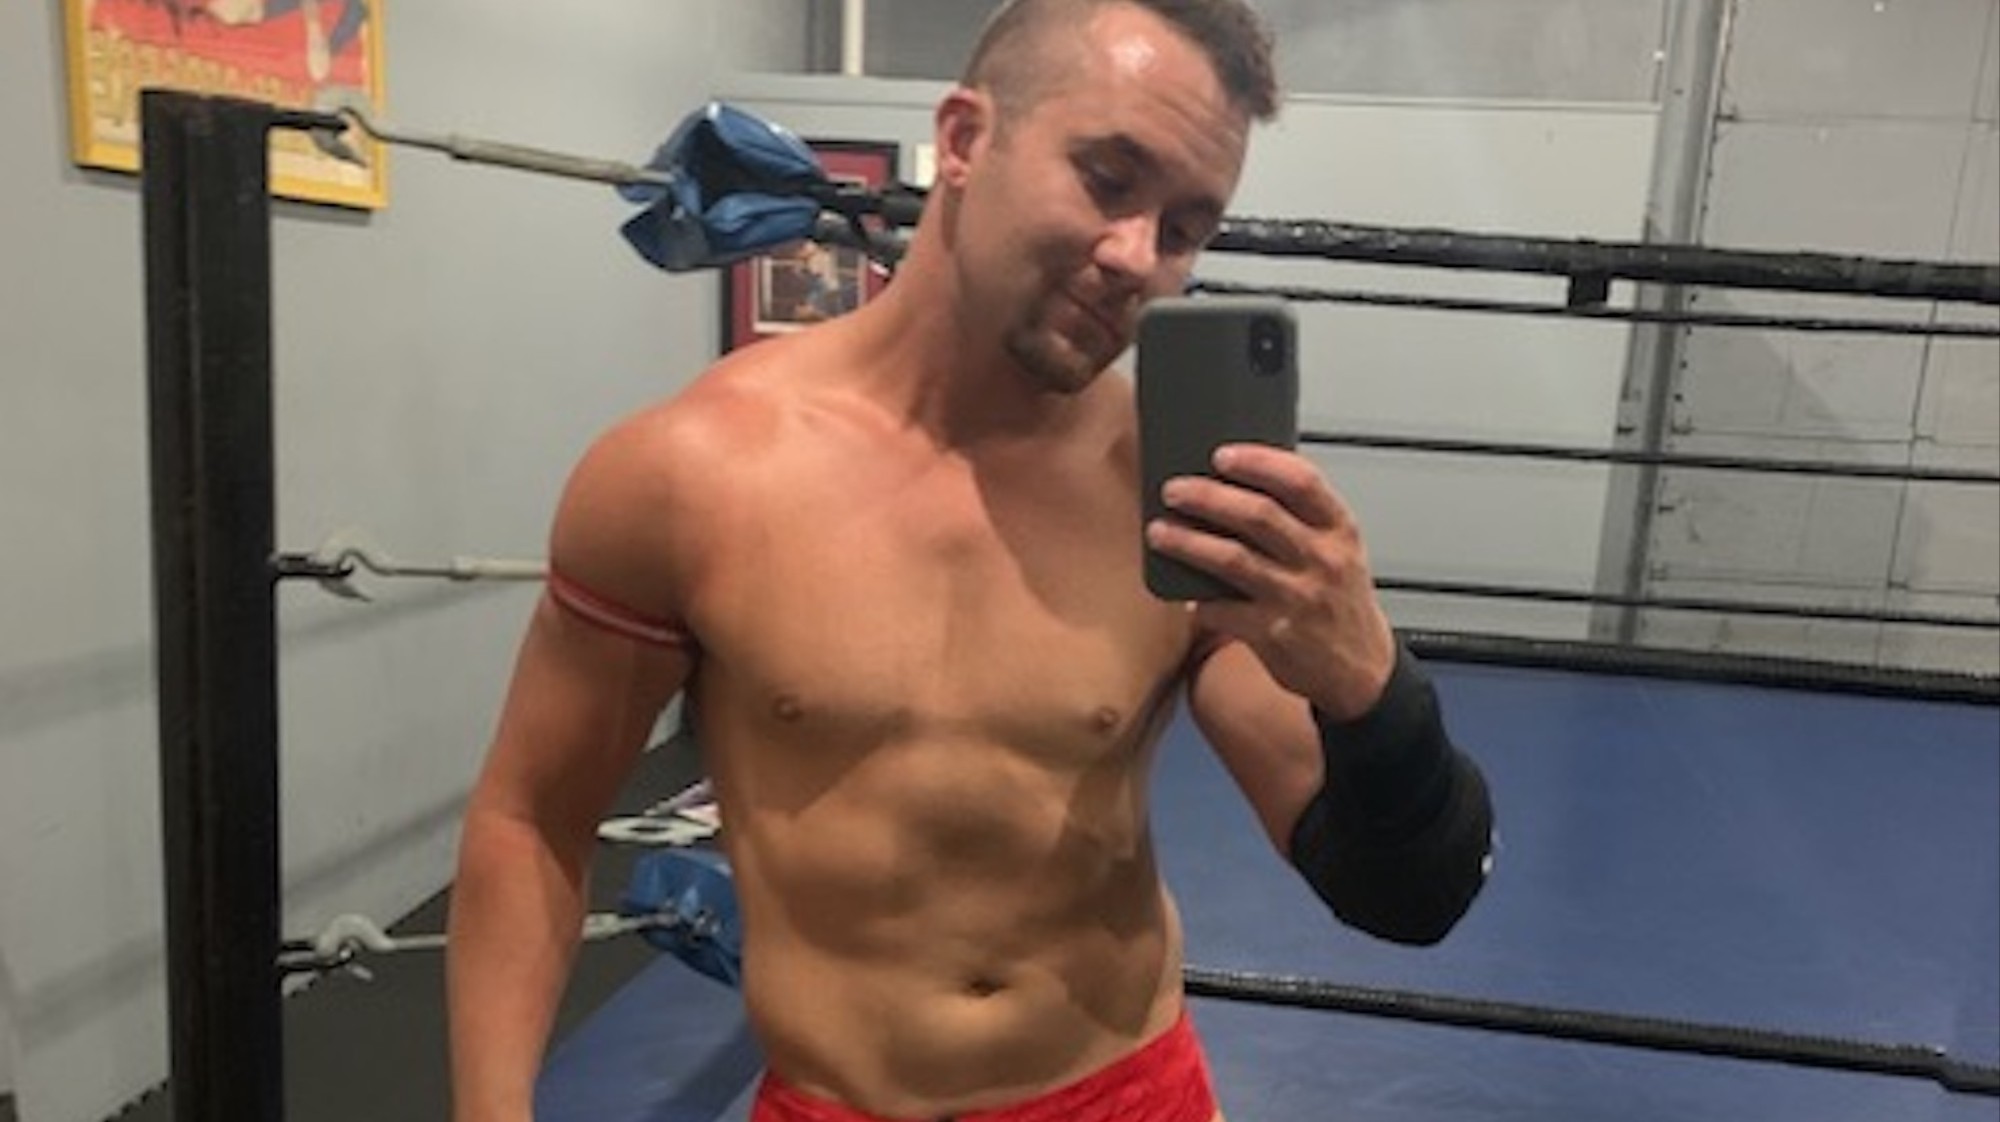 Wrestlers Who Have Done Porn - Inside Gay Wrestling Porn with the Industry's Sexiest ...